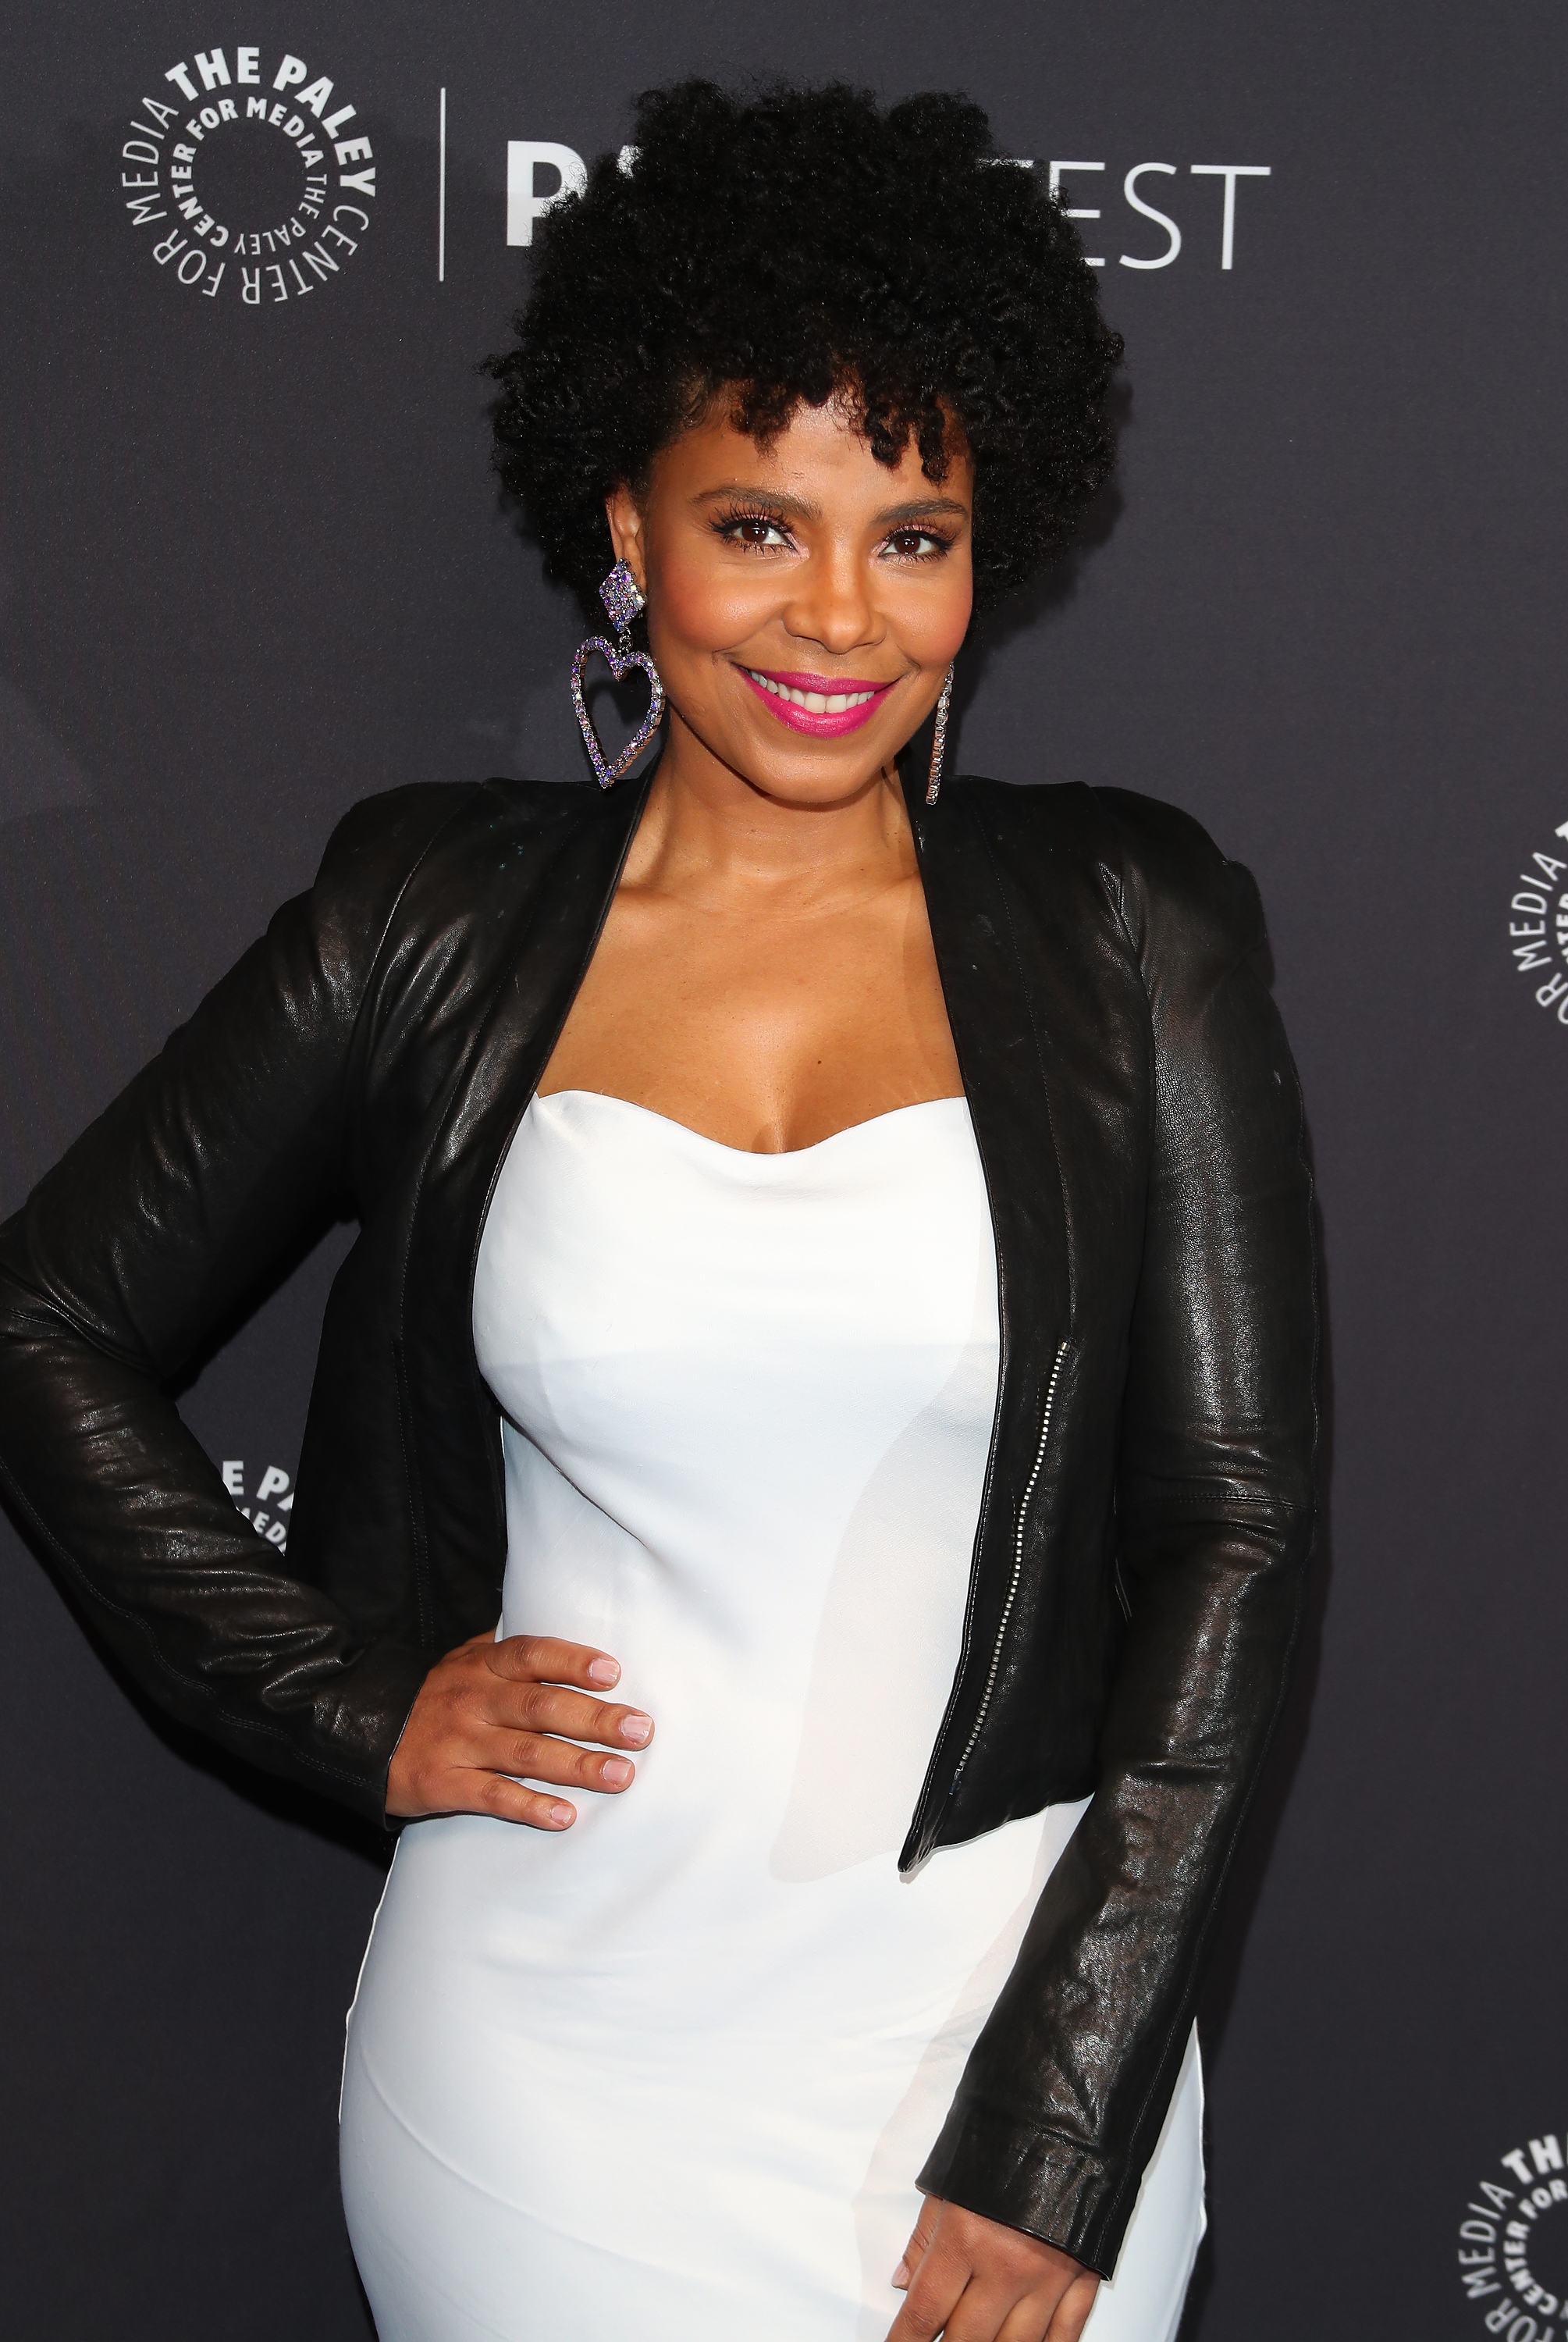 Sanaa Lathan at the Paley Center For Media's 2019 PaleyFest LA - "Star Trek: Discovery" and "The Twilight Zone" | Source: Getty Images